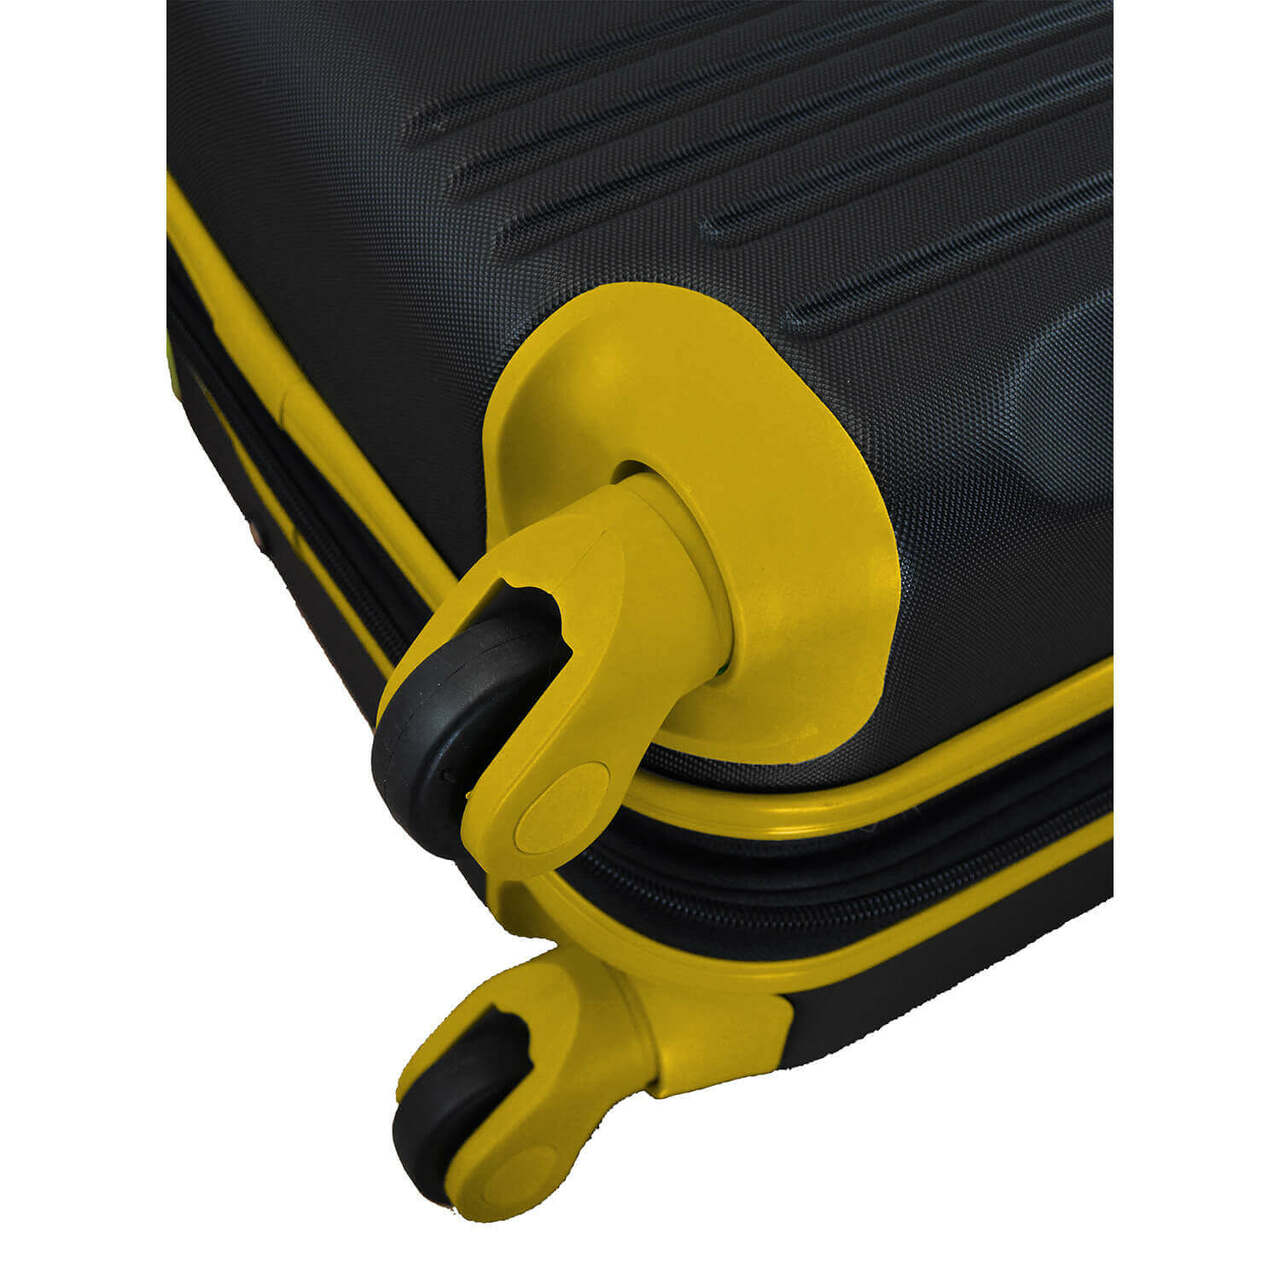 Michigan Carry On Spinner Luggage | Michigan Hardcase Two-Tone Luggage Carry-on Spinner in Yellow